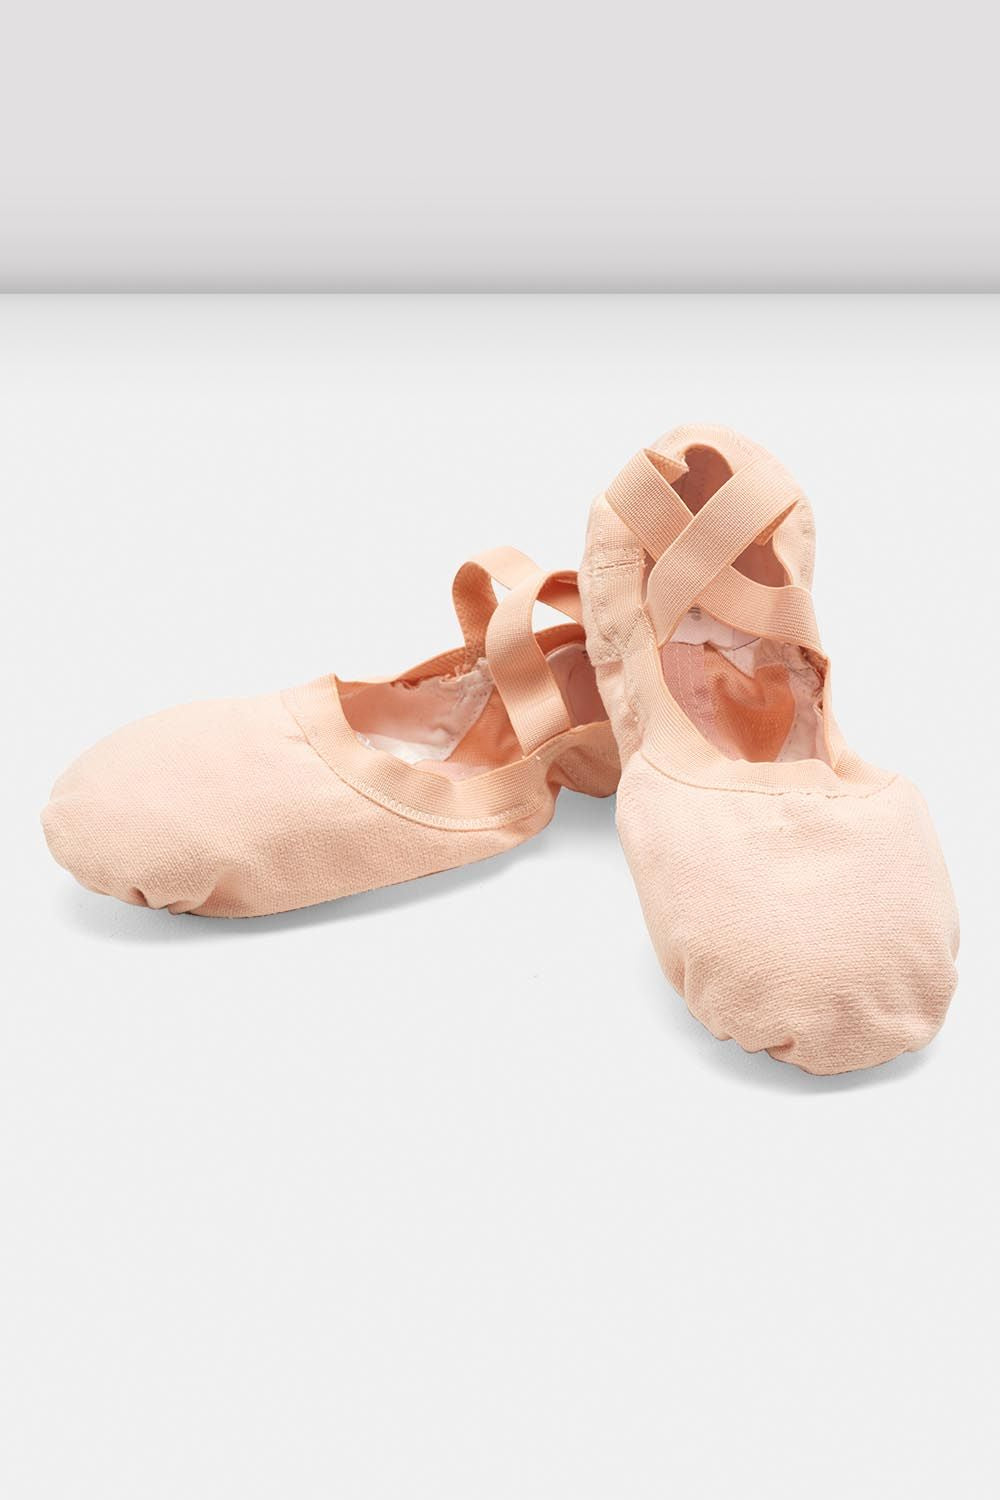 I bought bloch slippers before my first ballet class, and they fit a bit  weirdly. Is this normal? : r/BALLET